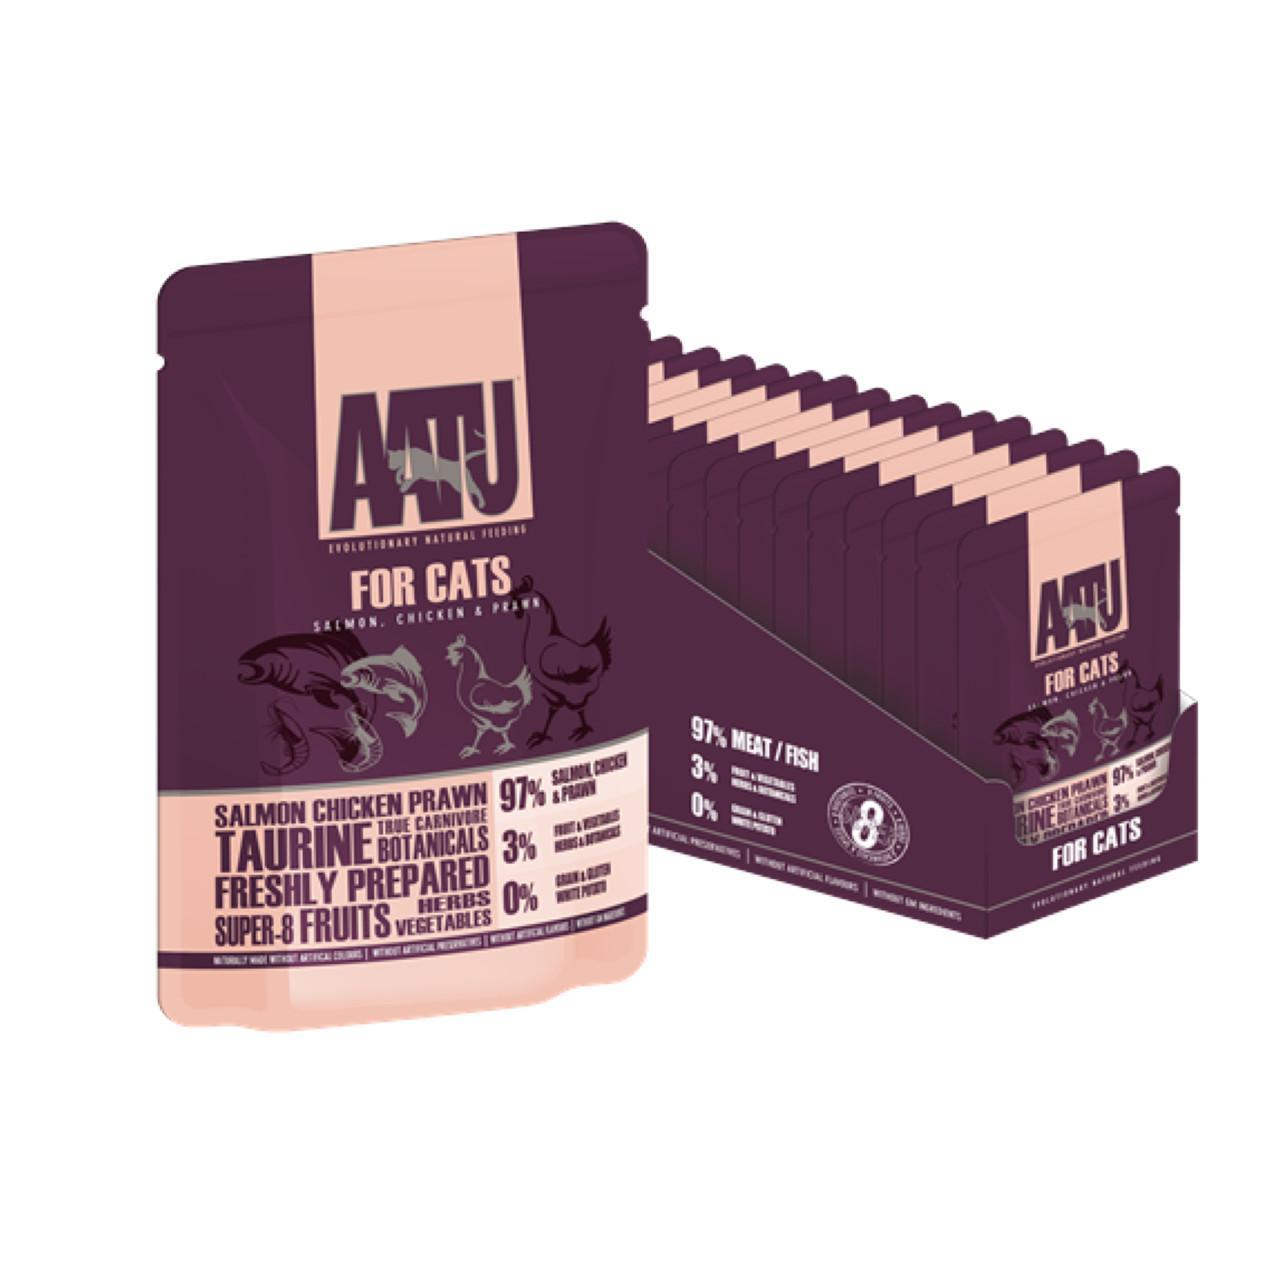 An image of AATU For Cats Salmon, Chicken & Prawn Pouches